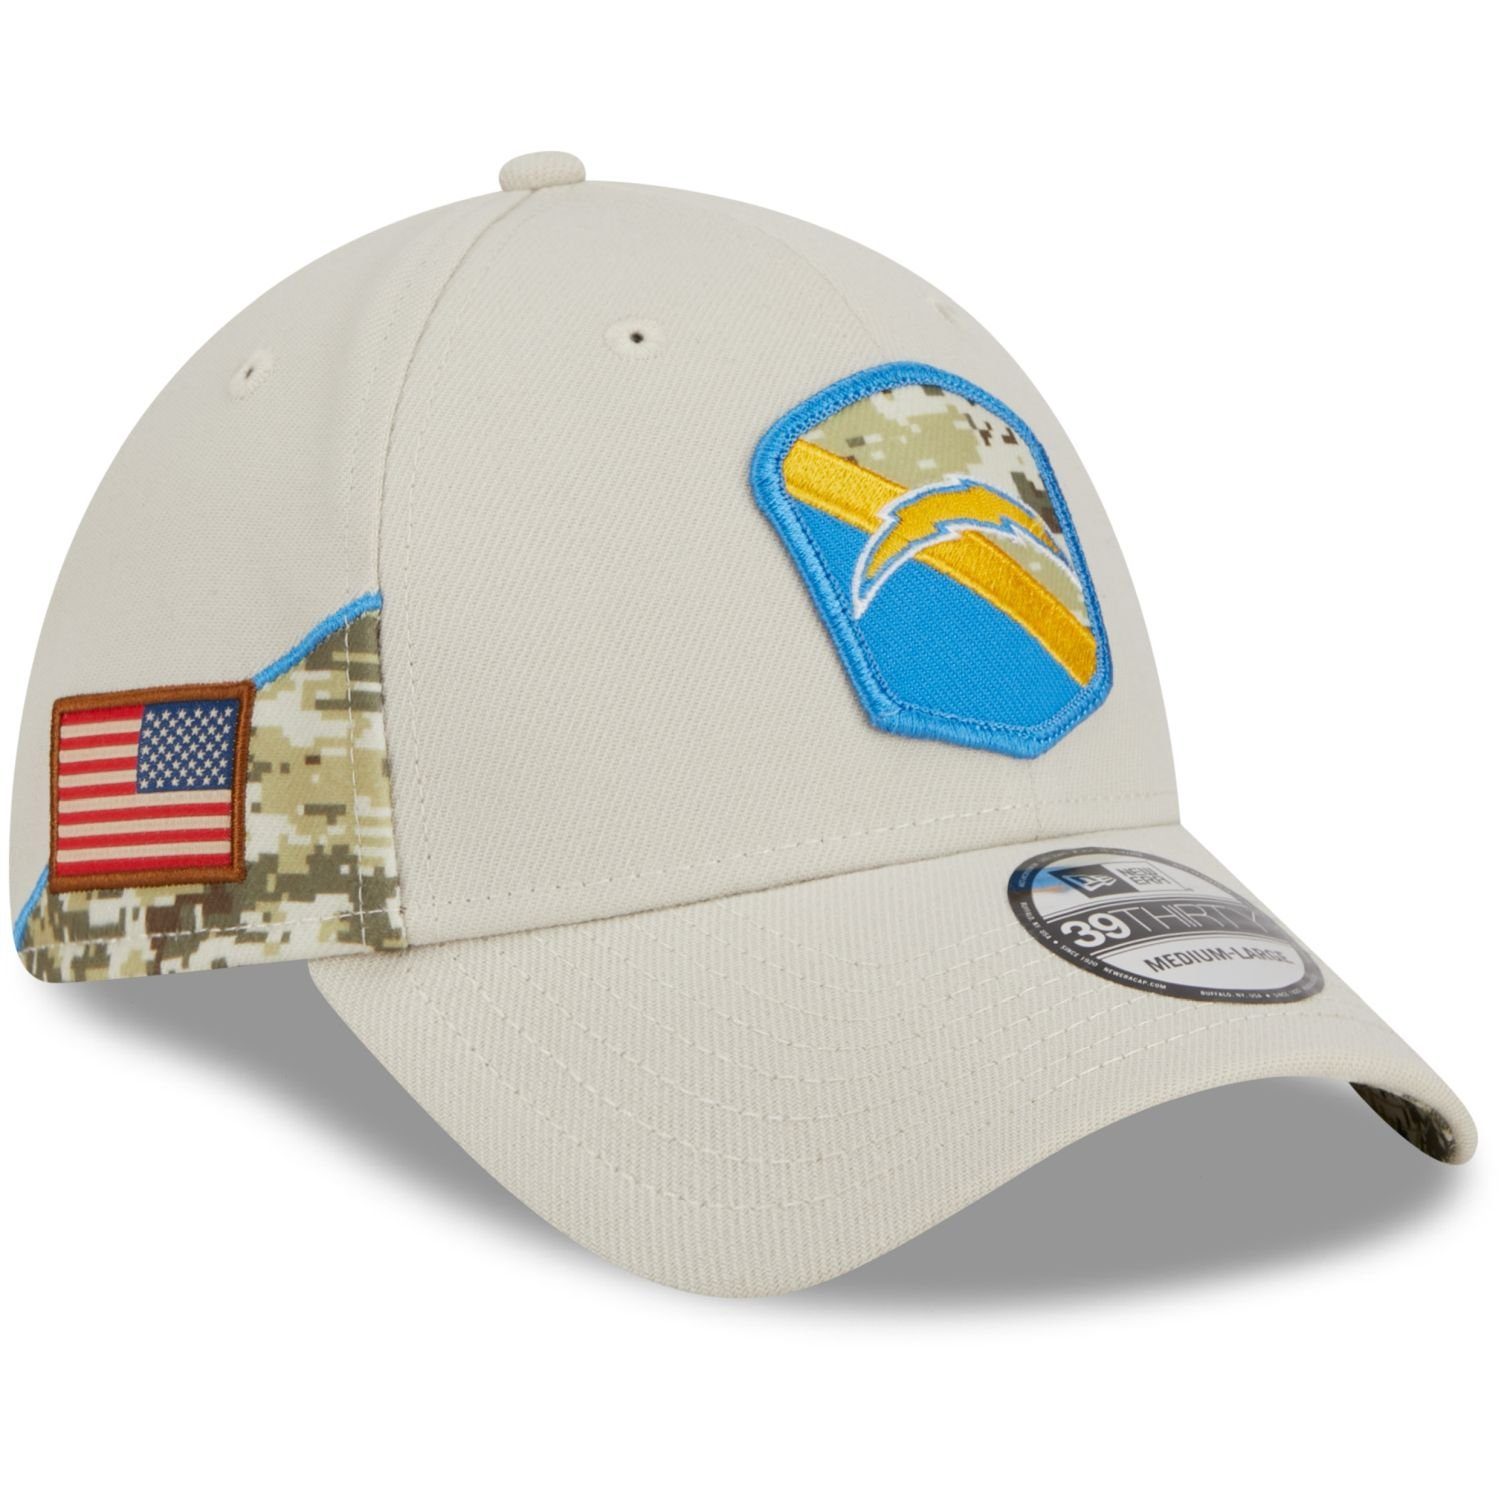 New Era Flex Service StretchFit Cap Salute Los to NFL 39Thirty Angeles Chargers